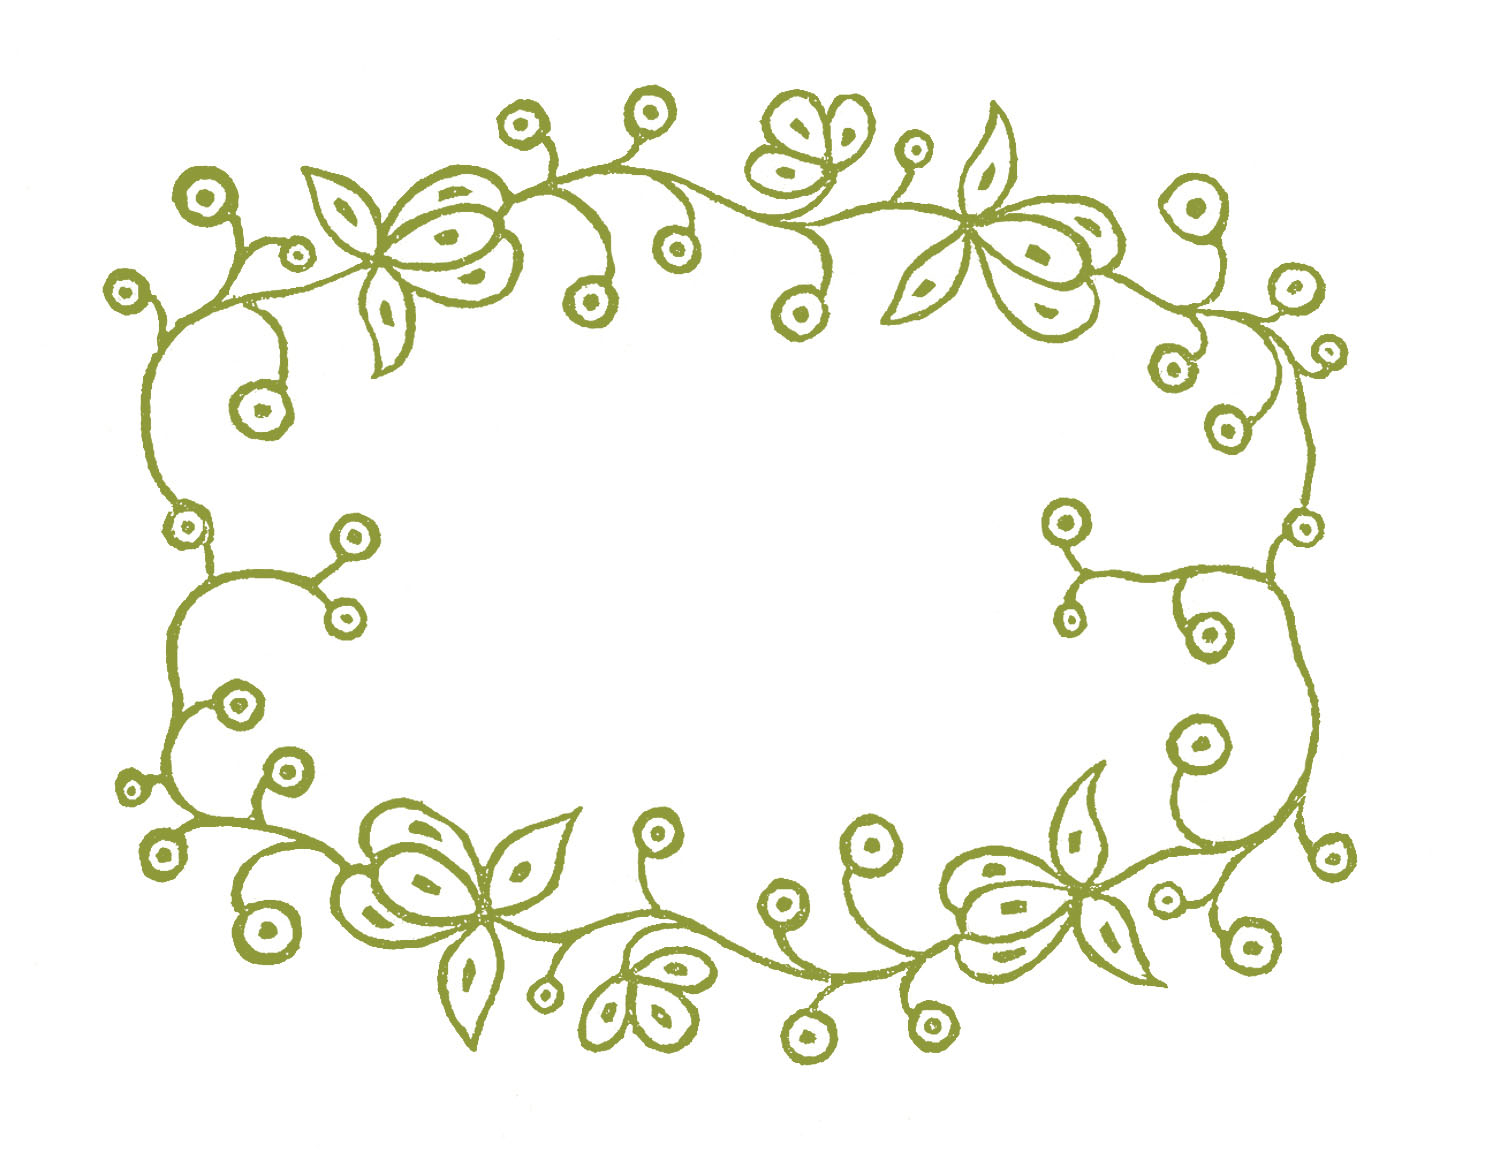 Free Vintage Embroidery Patterns Download Royalty Free Images Embroidery Patterns Floral Frames The